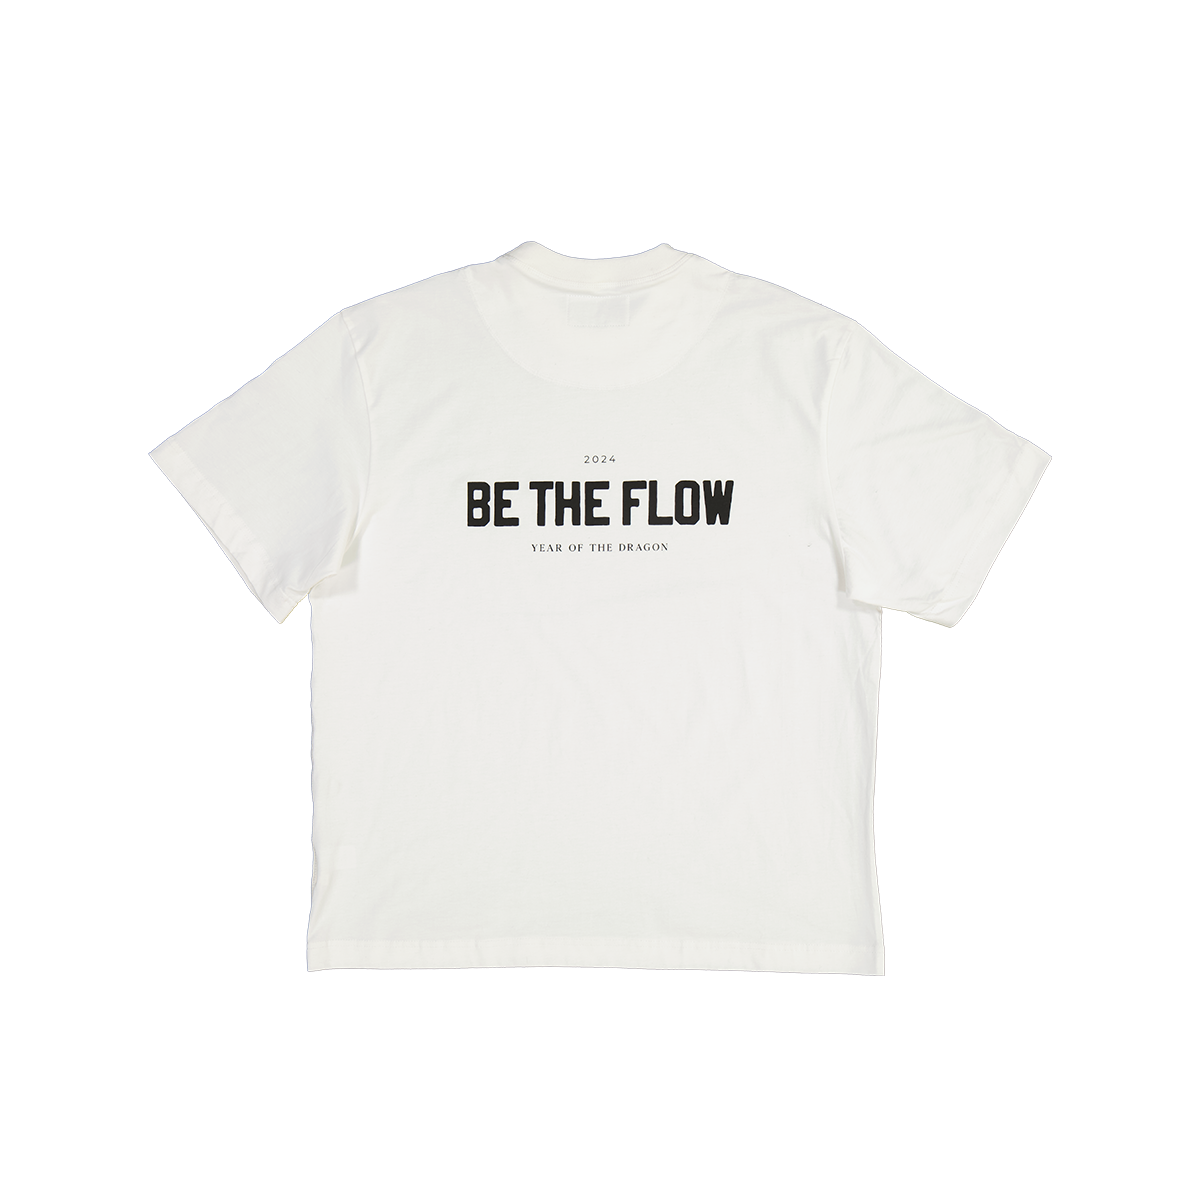 BE THE FLOW Tee